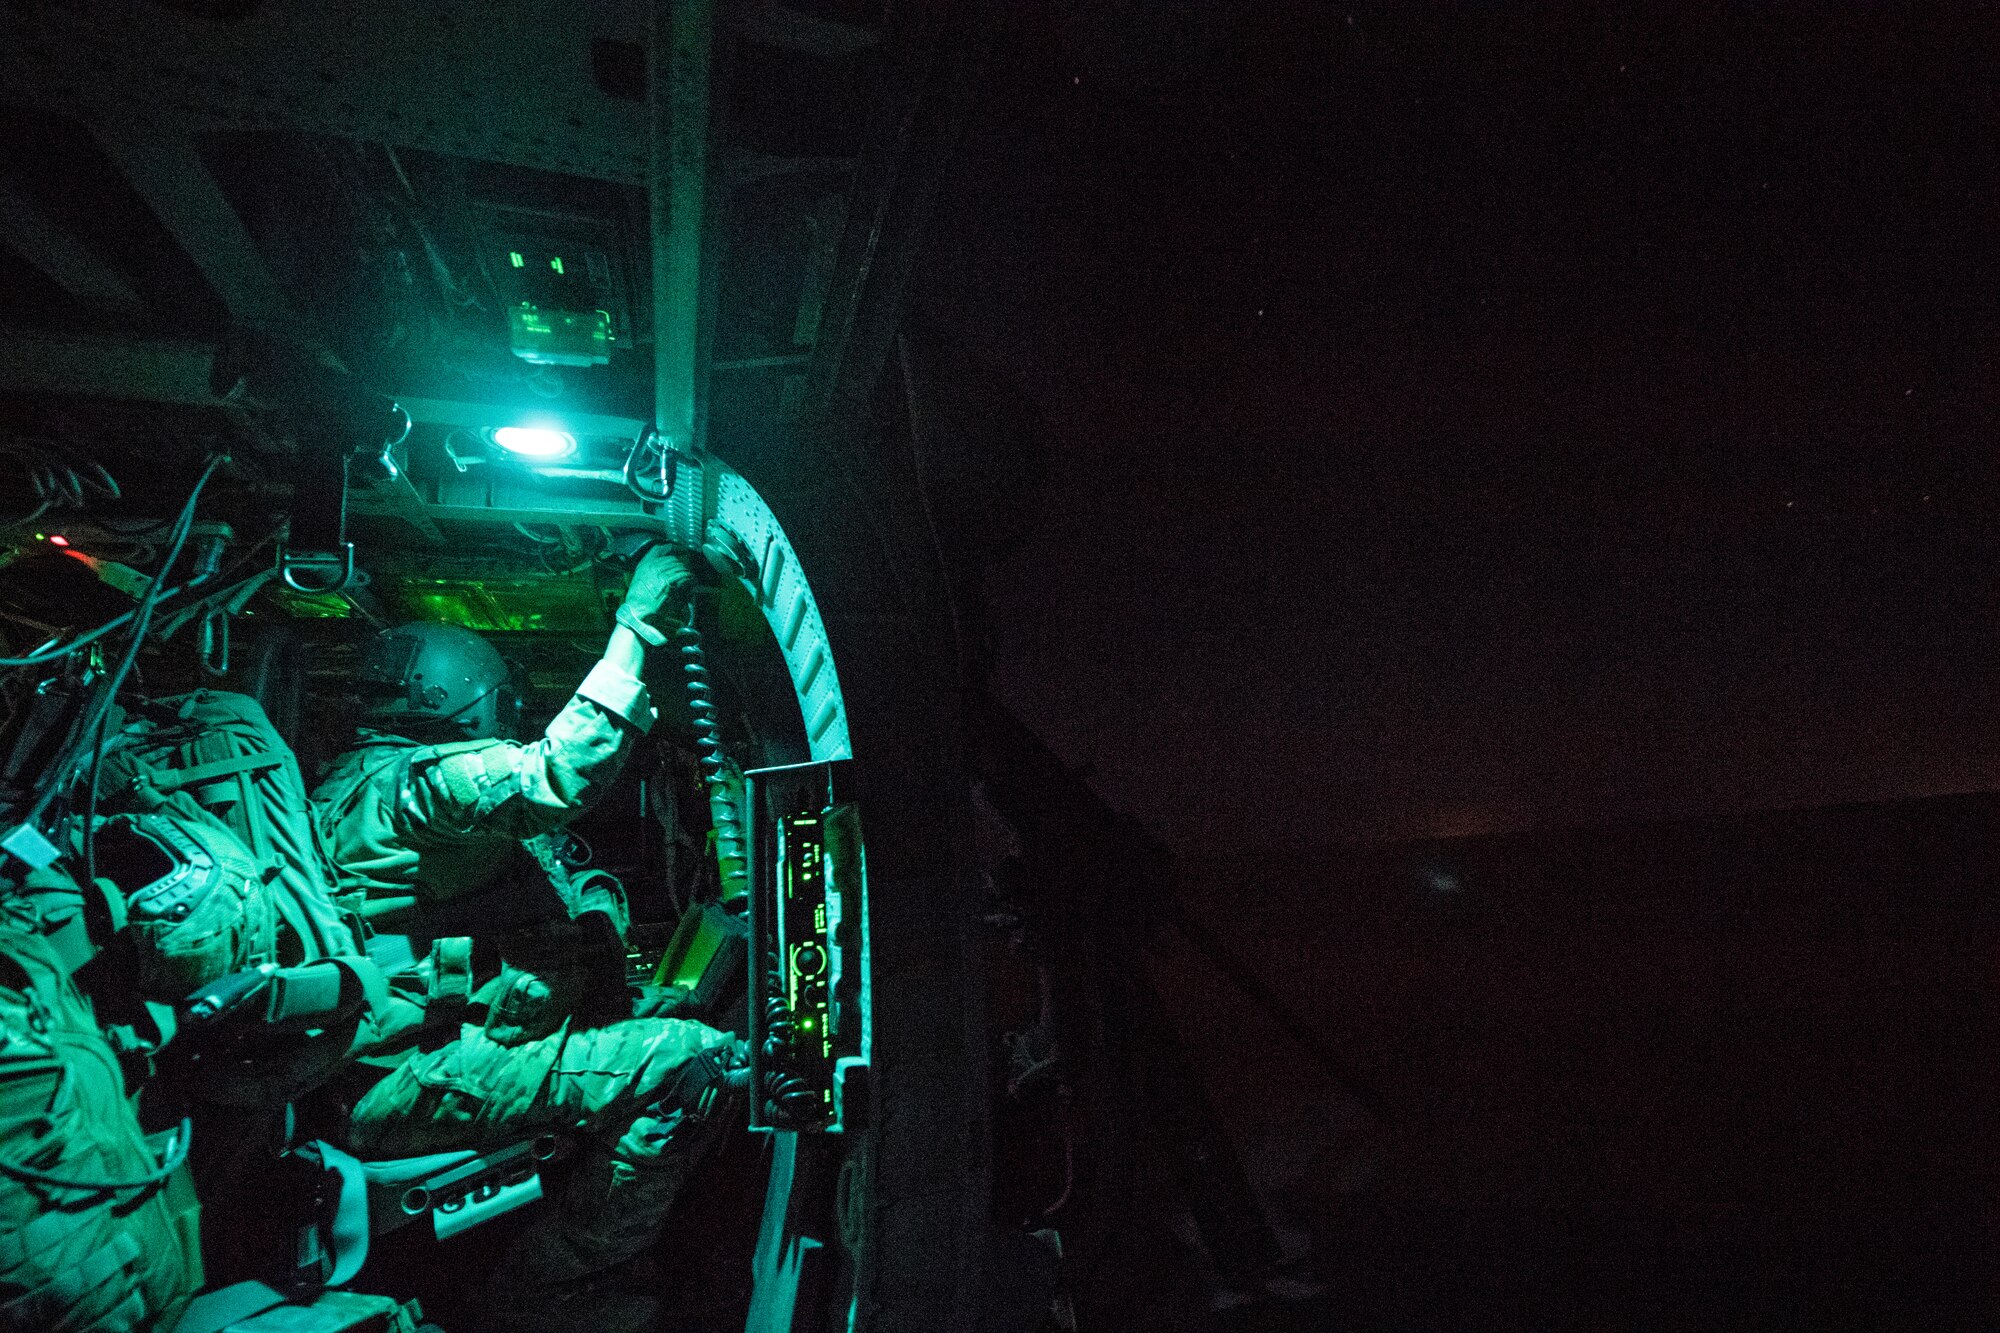 A U.S. Air Force special mission aviator assigned to the 46th Expeditionary Rescue Squadron sits onboard a HH-60G Pavehawk during a mission over Iraq, July 18, 2018. The primary mission of the HH-60G Pave Hawk helicopter is to conduct day or night personnel recovery operations into hostile environments to recover isolated personnel during war. (U.S. Air Force photo by Staff Sgt. Keith James)